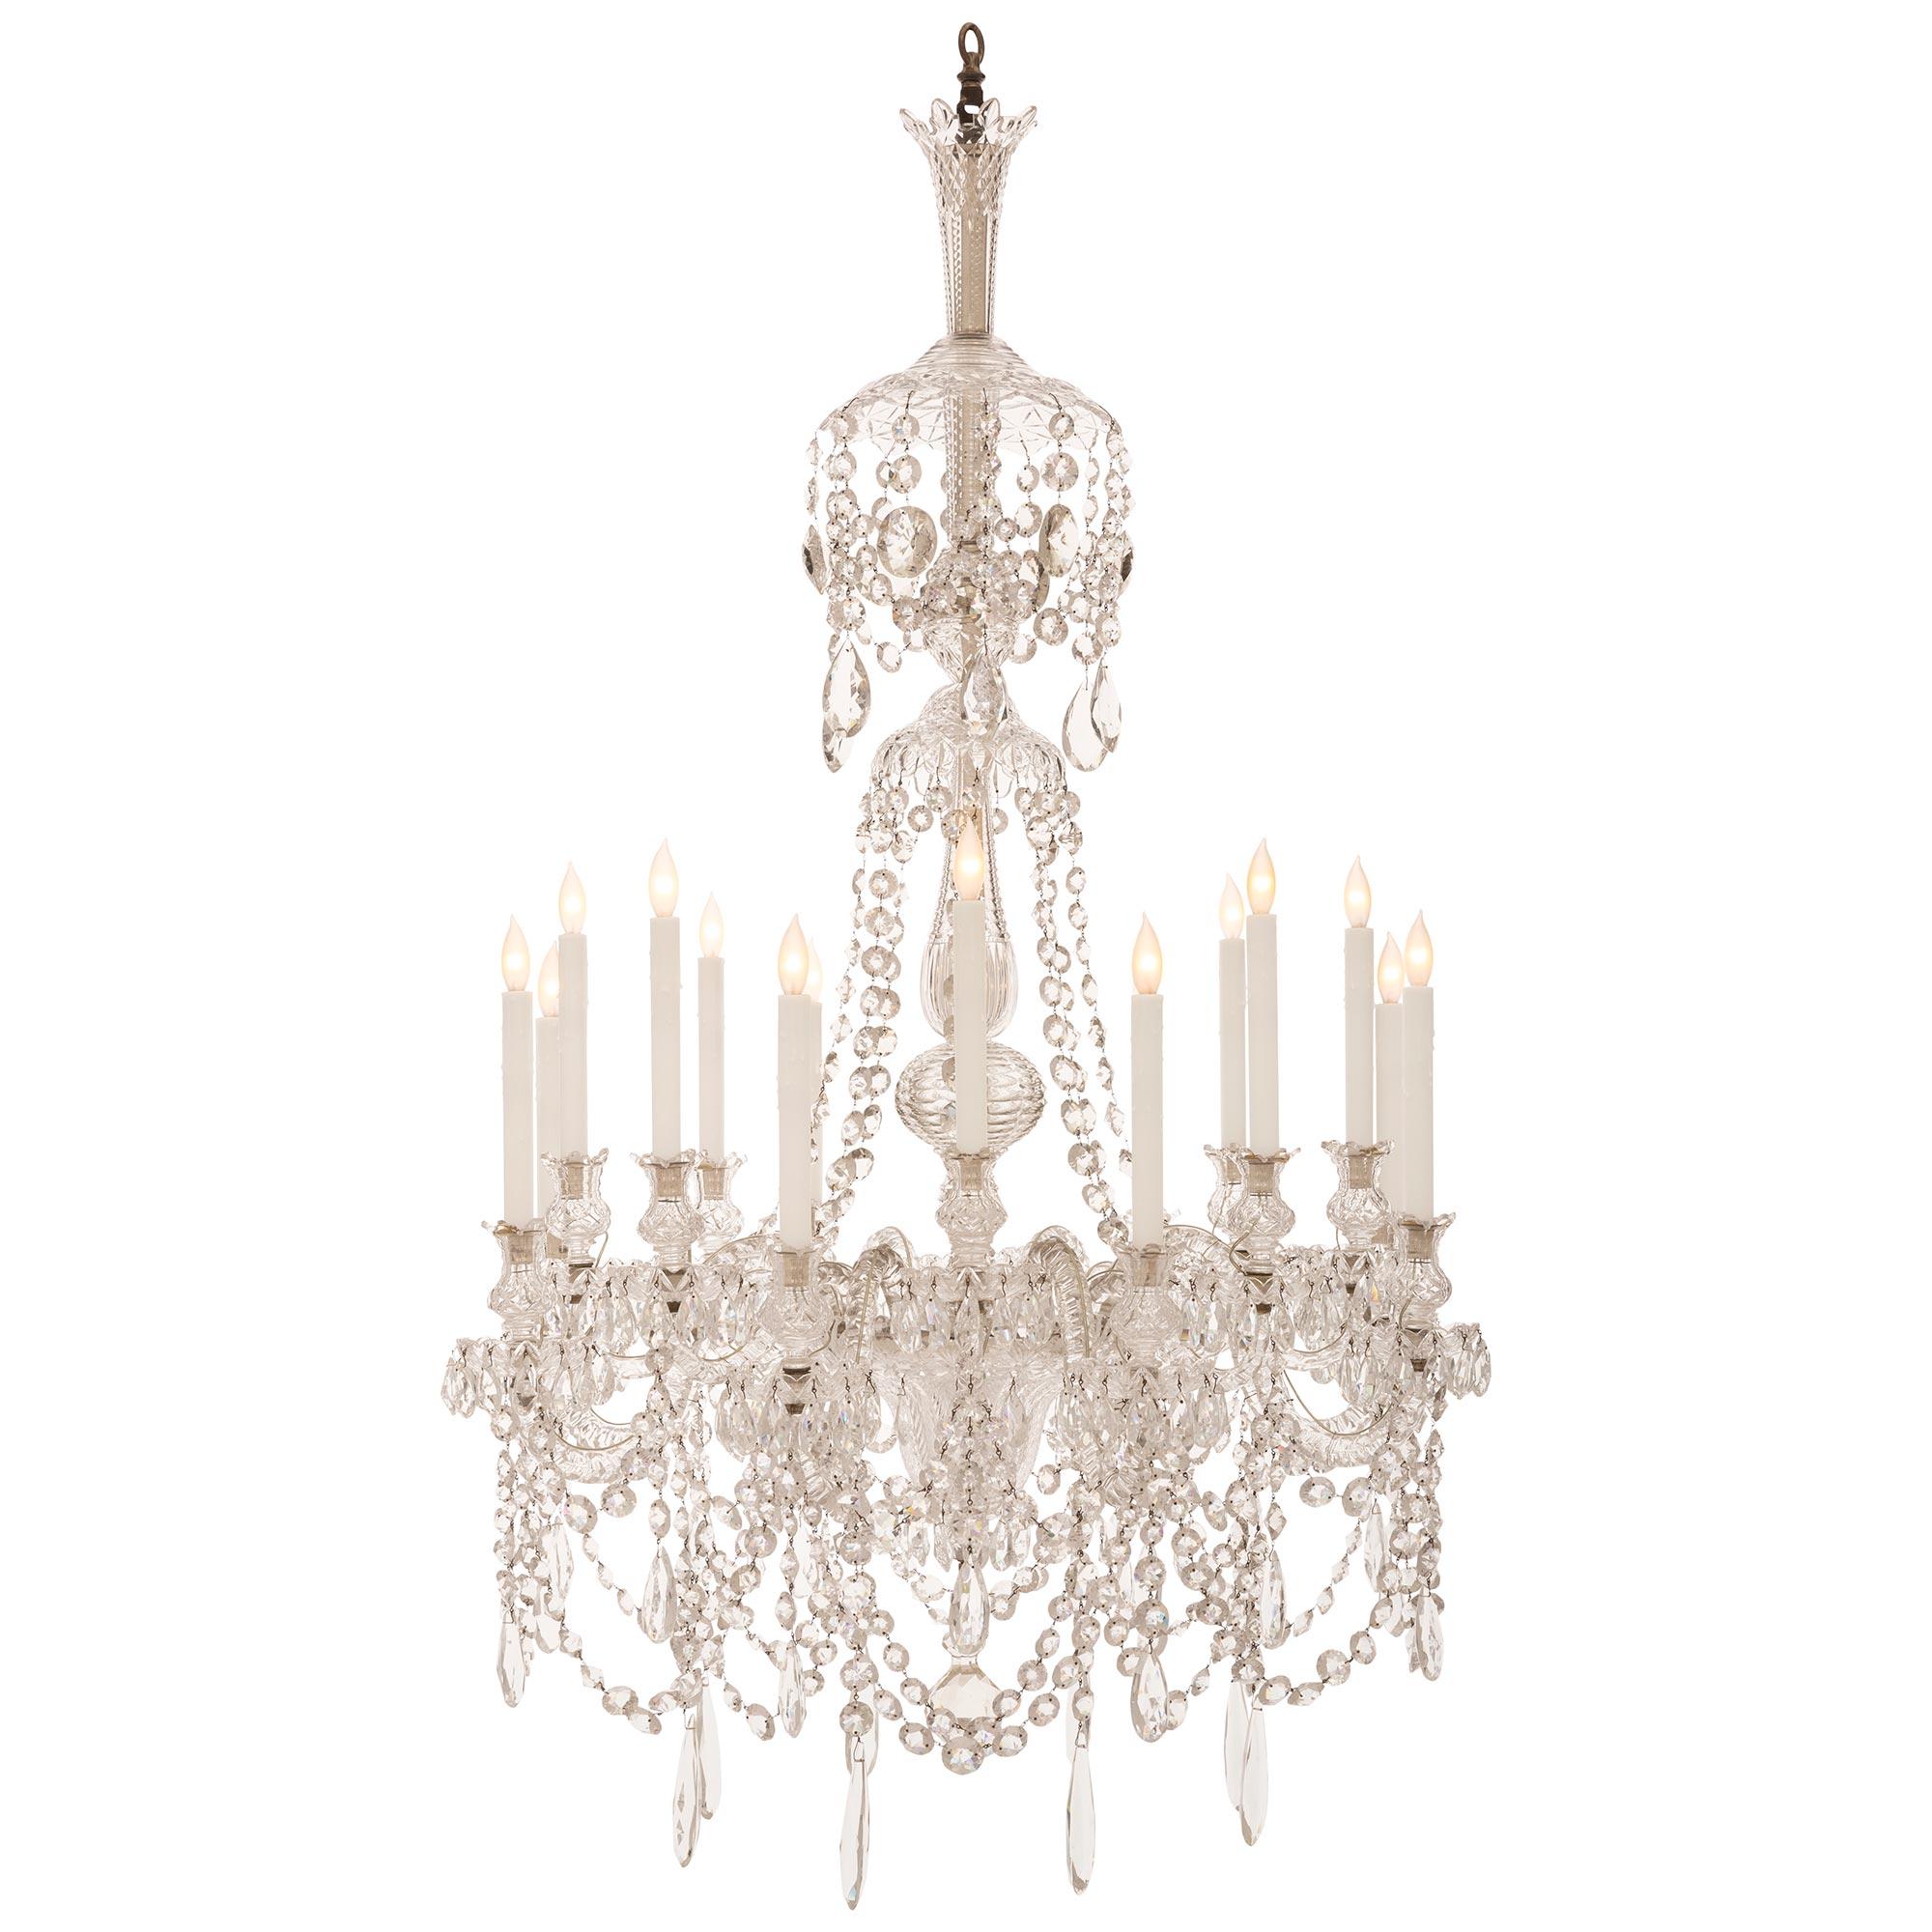 A stunning and most impressive French 19th Louis XVI st. Baccarat crystal chandelier. The sixteen arm chandelier is centered by a beautiful faceted solid crystal ball pendant amidst an exceptional array of cut crystal pendants and beautiful swaging